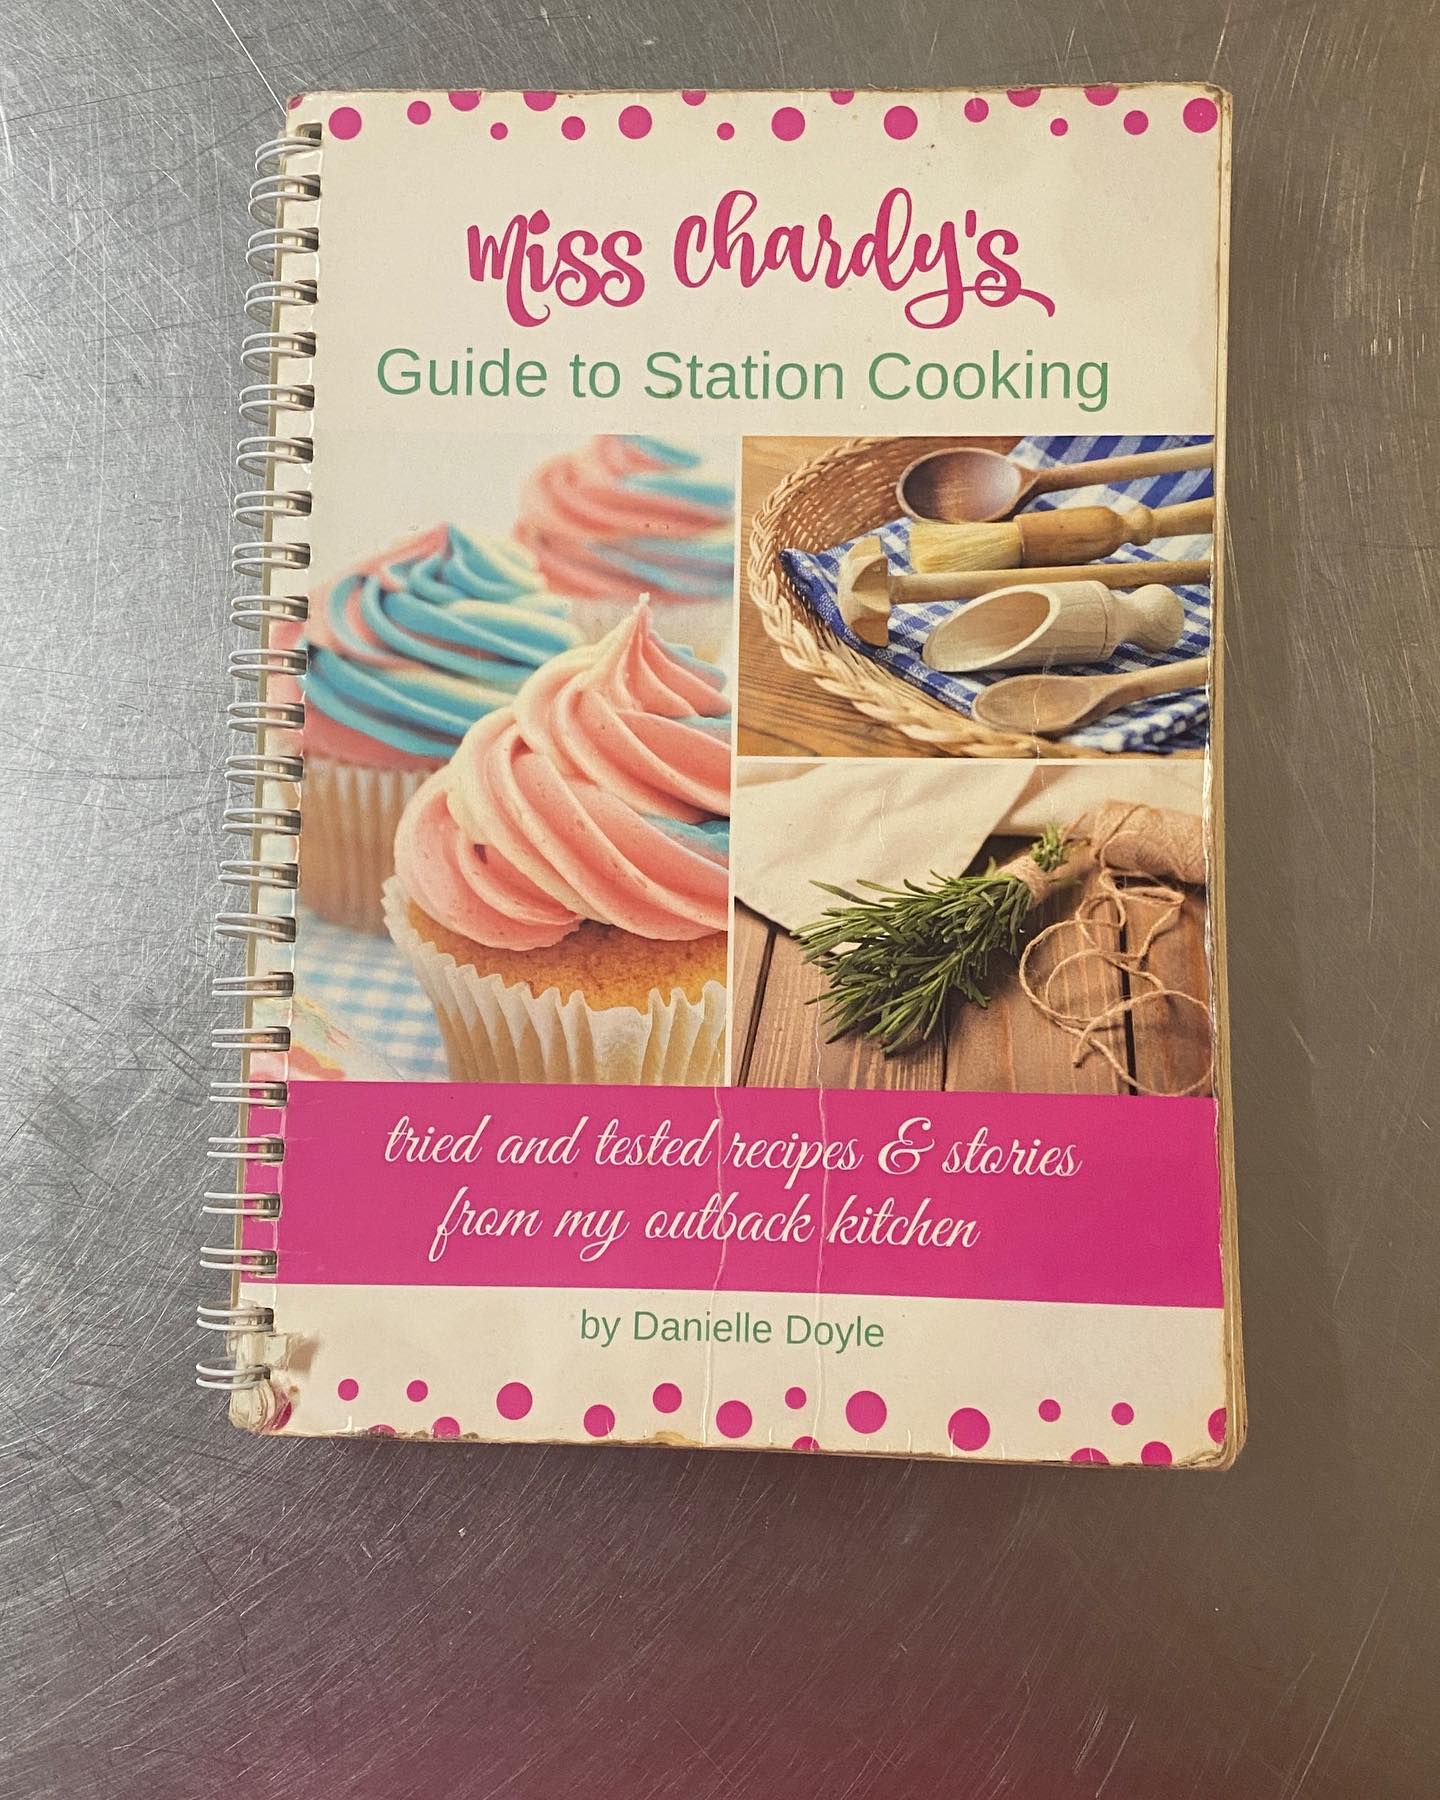 Miss Chardy's Guide to Station Cooking by Danielle Doyle